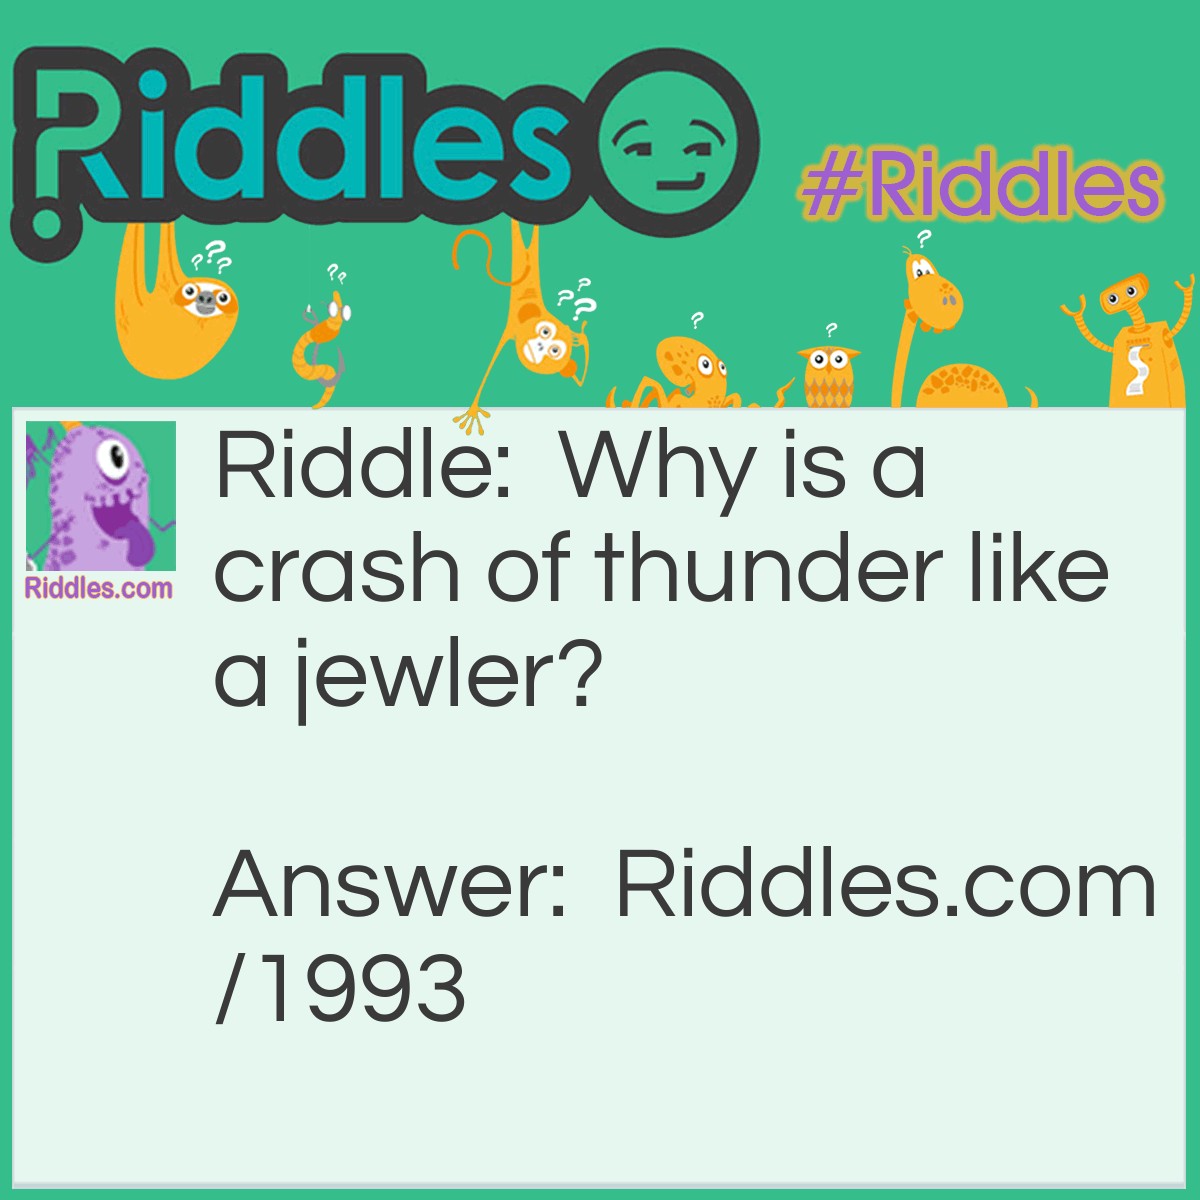 Riddle: Why is a crash of thunder like a jewler? Answer: Because both make the ear-ring.